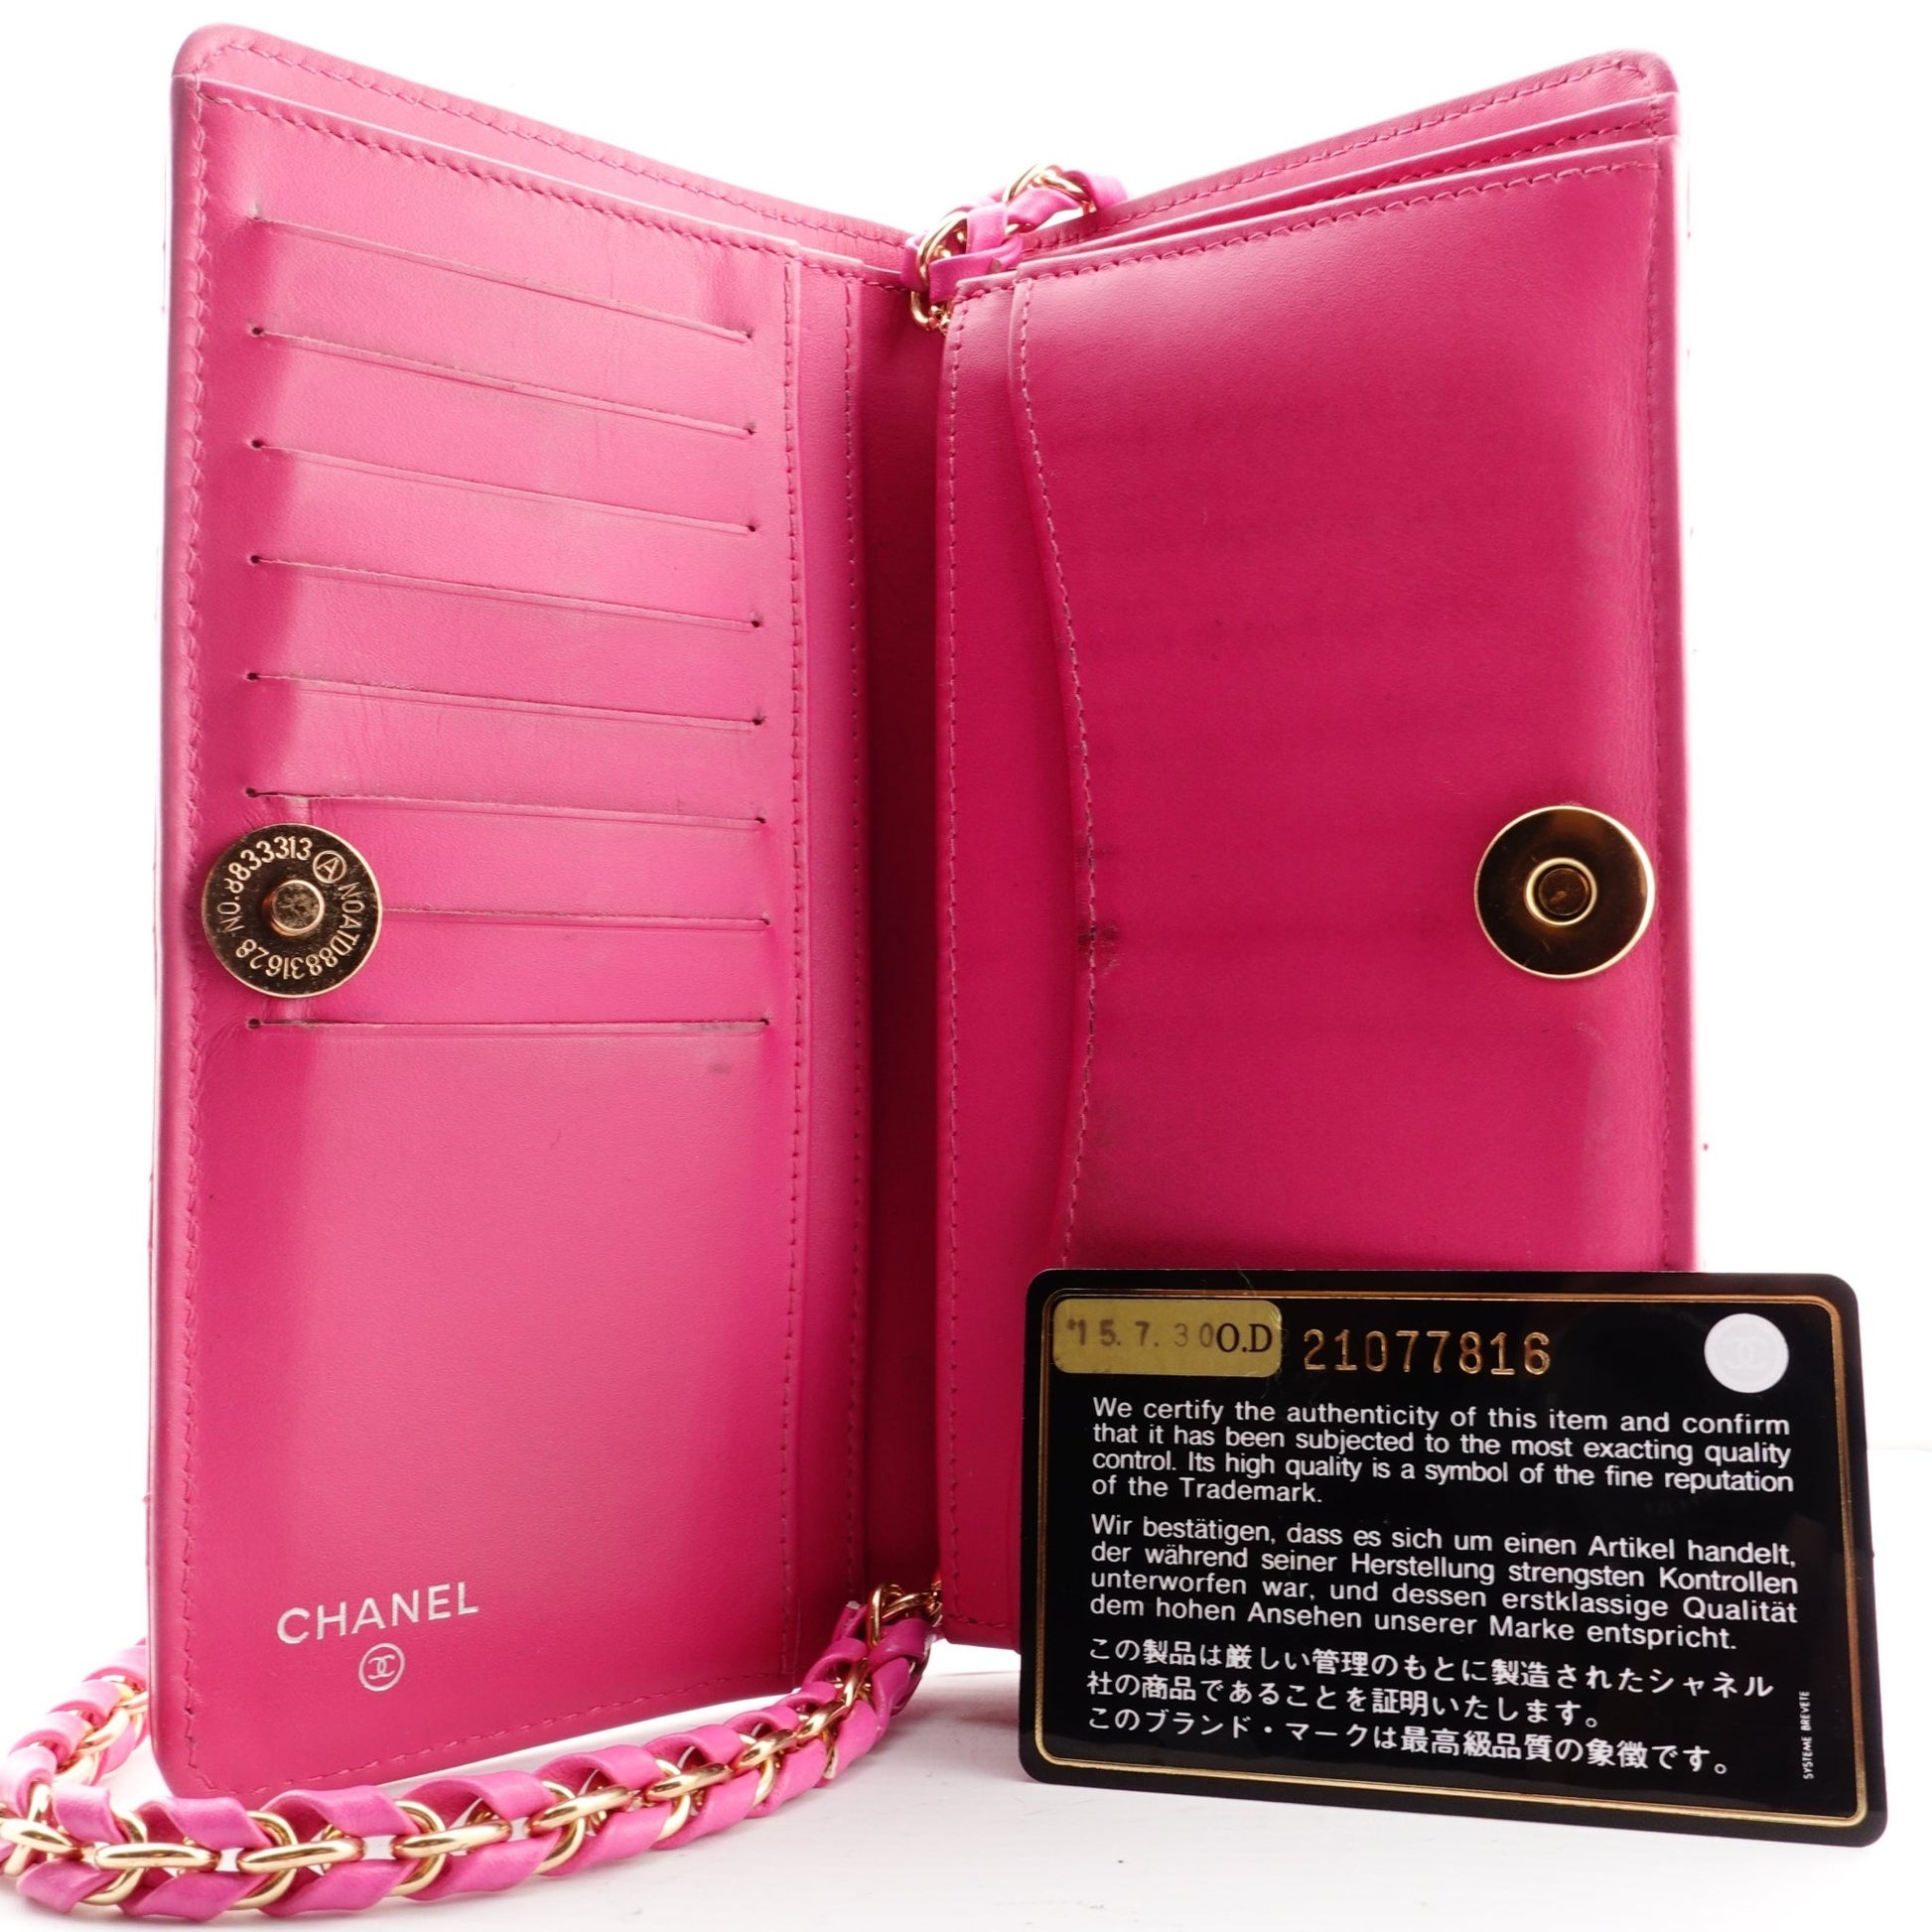 CHANEL Caviar Bifold Wallet with Chain - Bag Envy